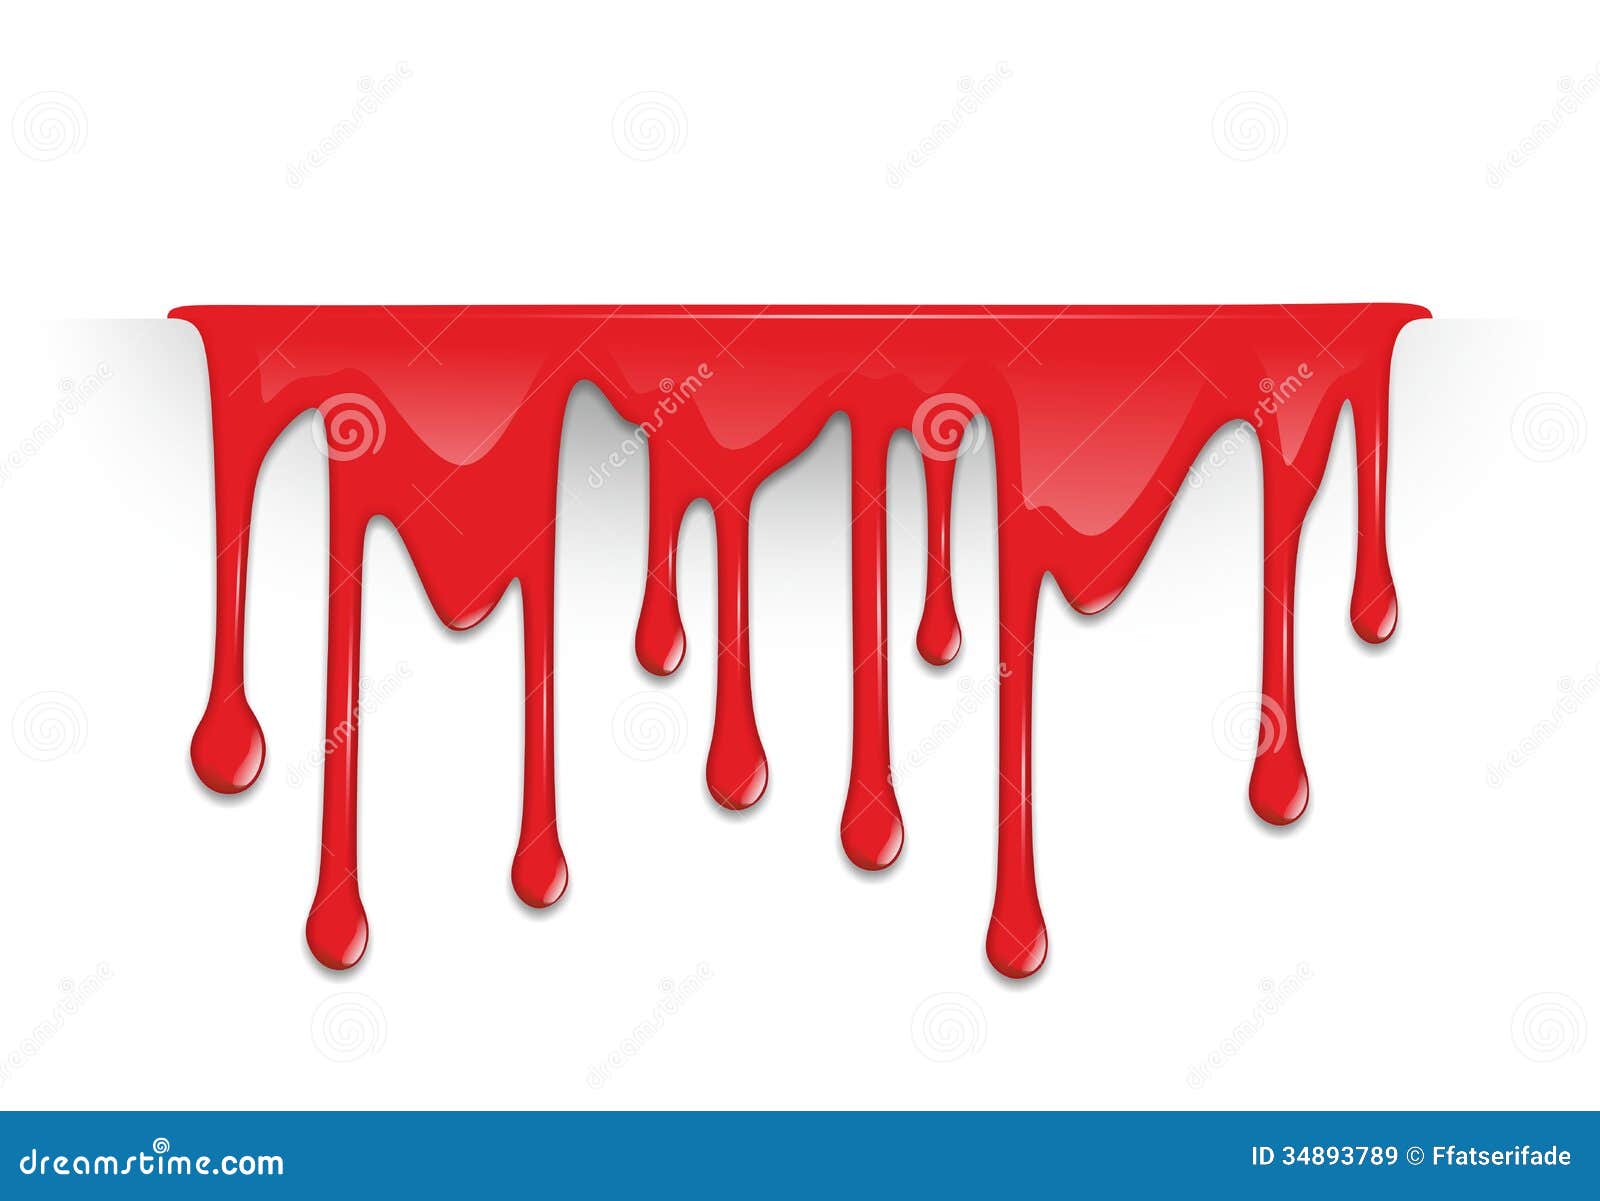 dripping blood clipart free - photo #23